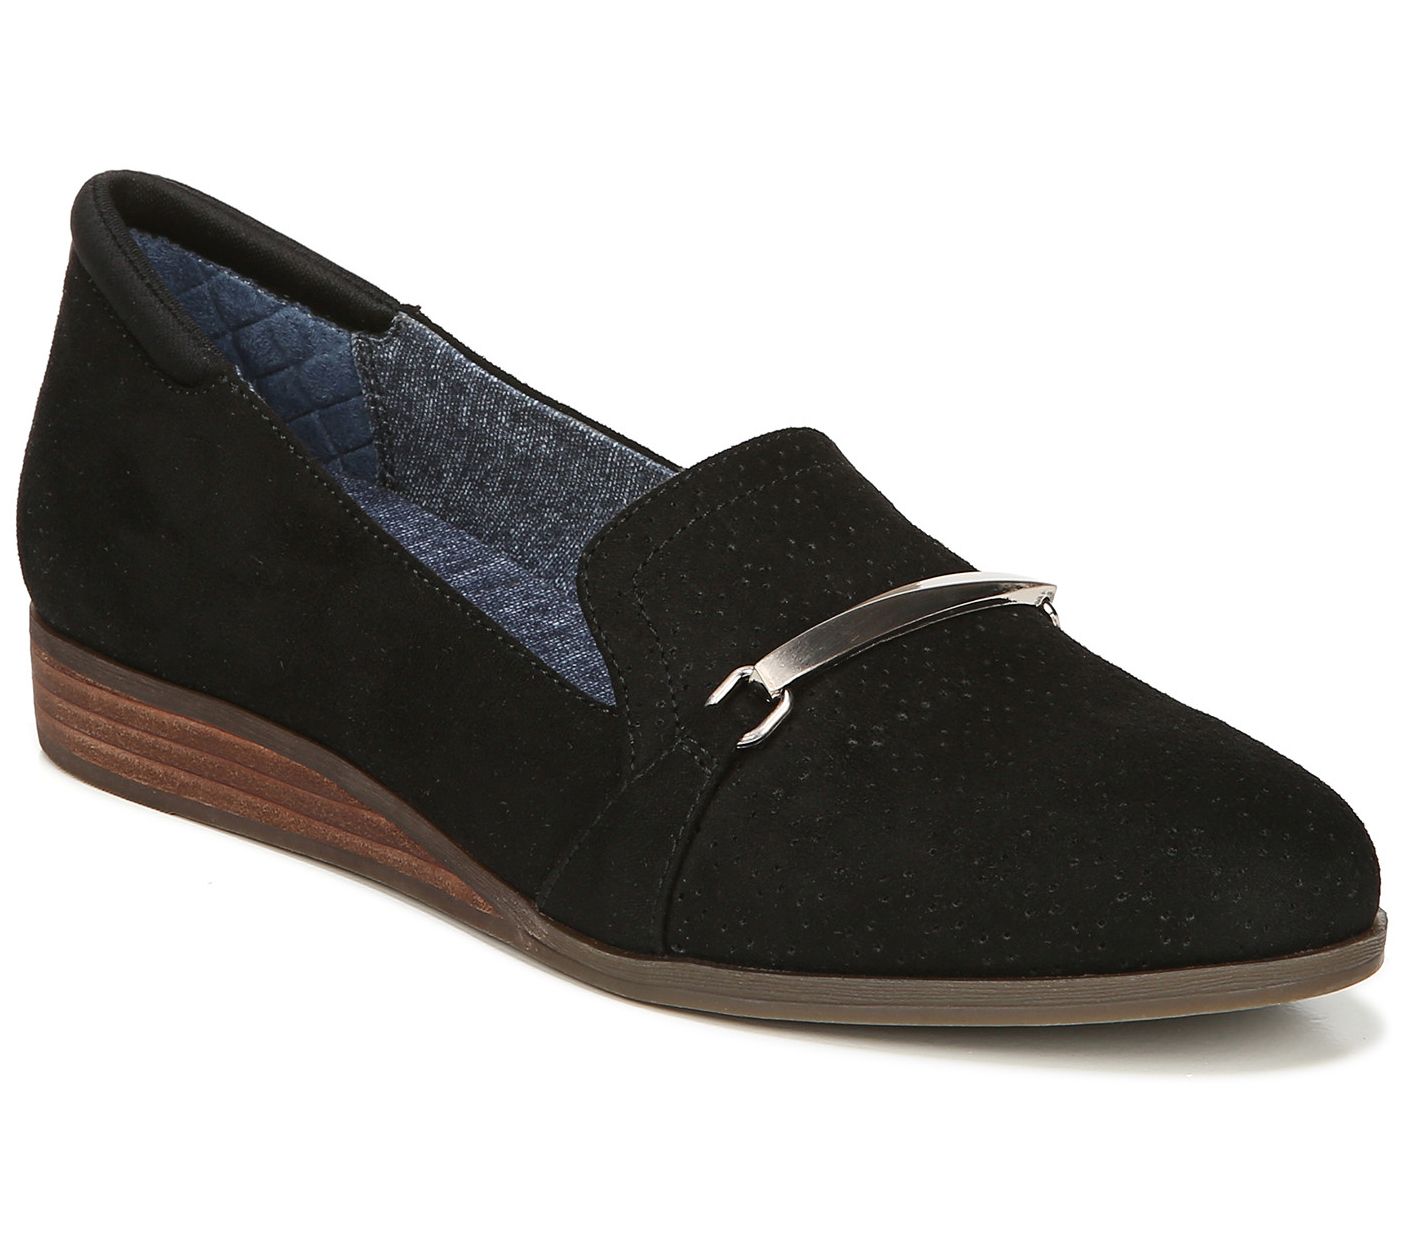 Dr. Scholl's Slip-On Wedge Loafers - Dezi - QVC.com